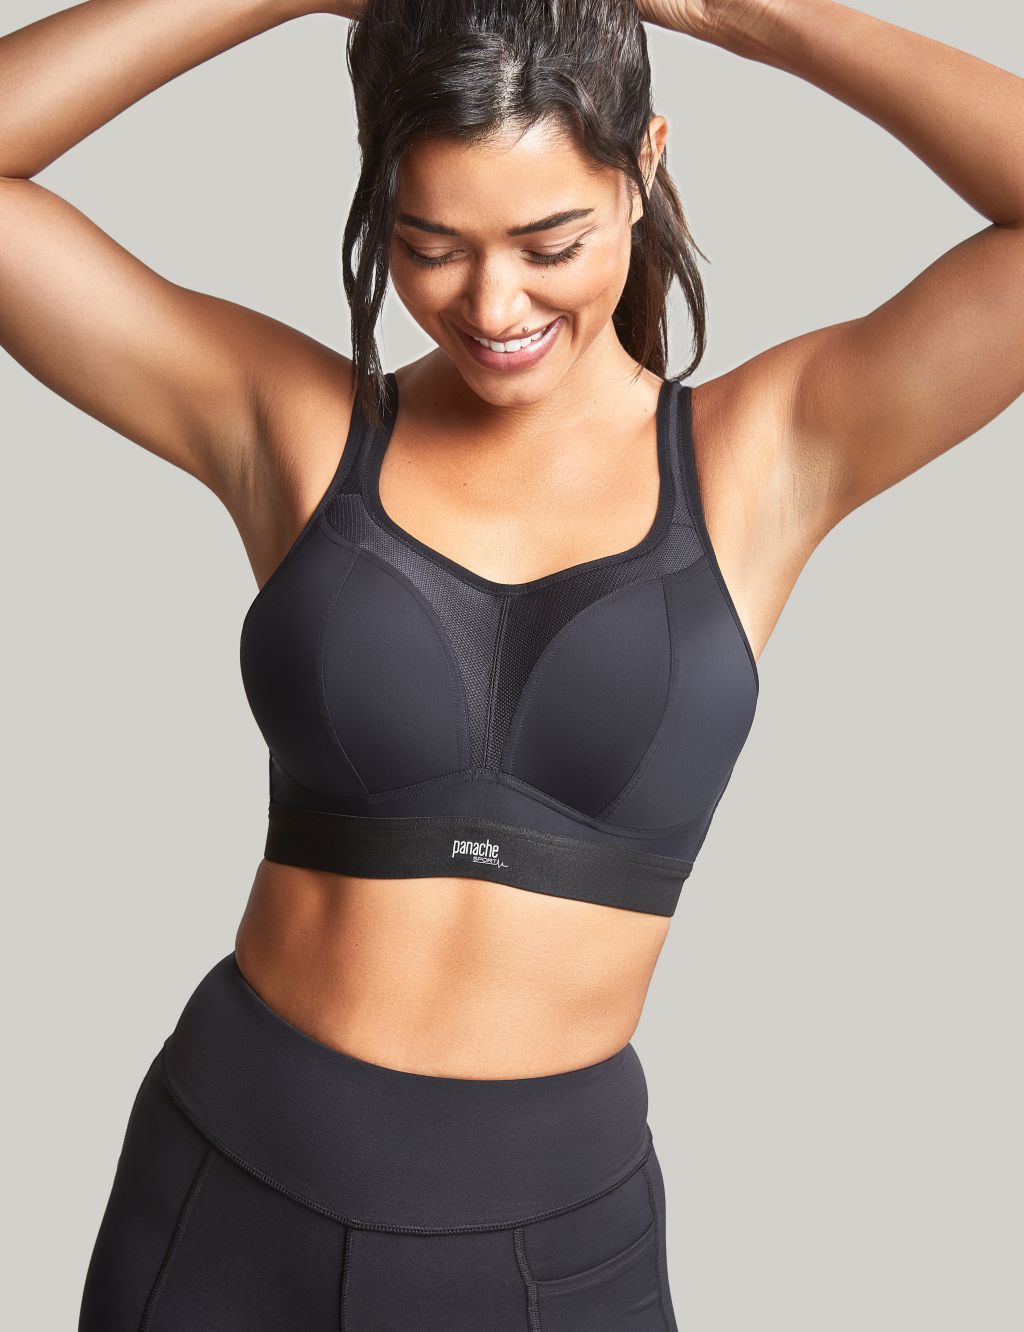 Ultimate Support Non Wired Sports Bra D-J image 1